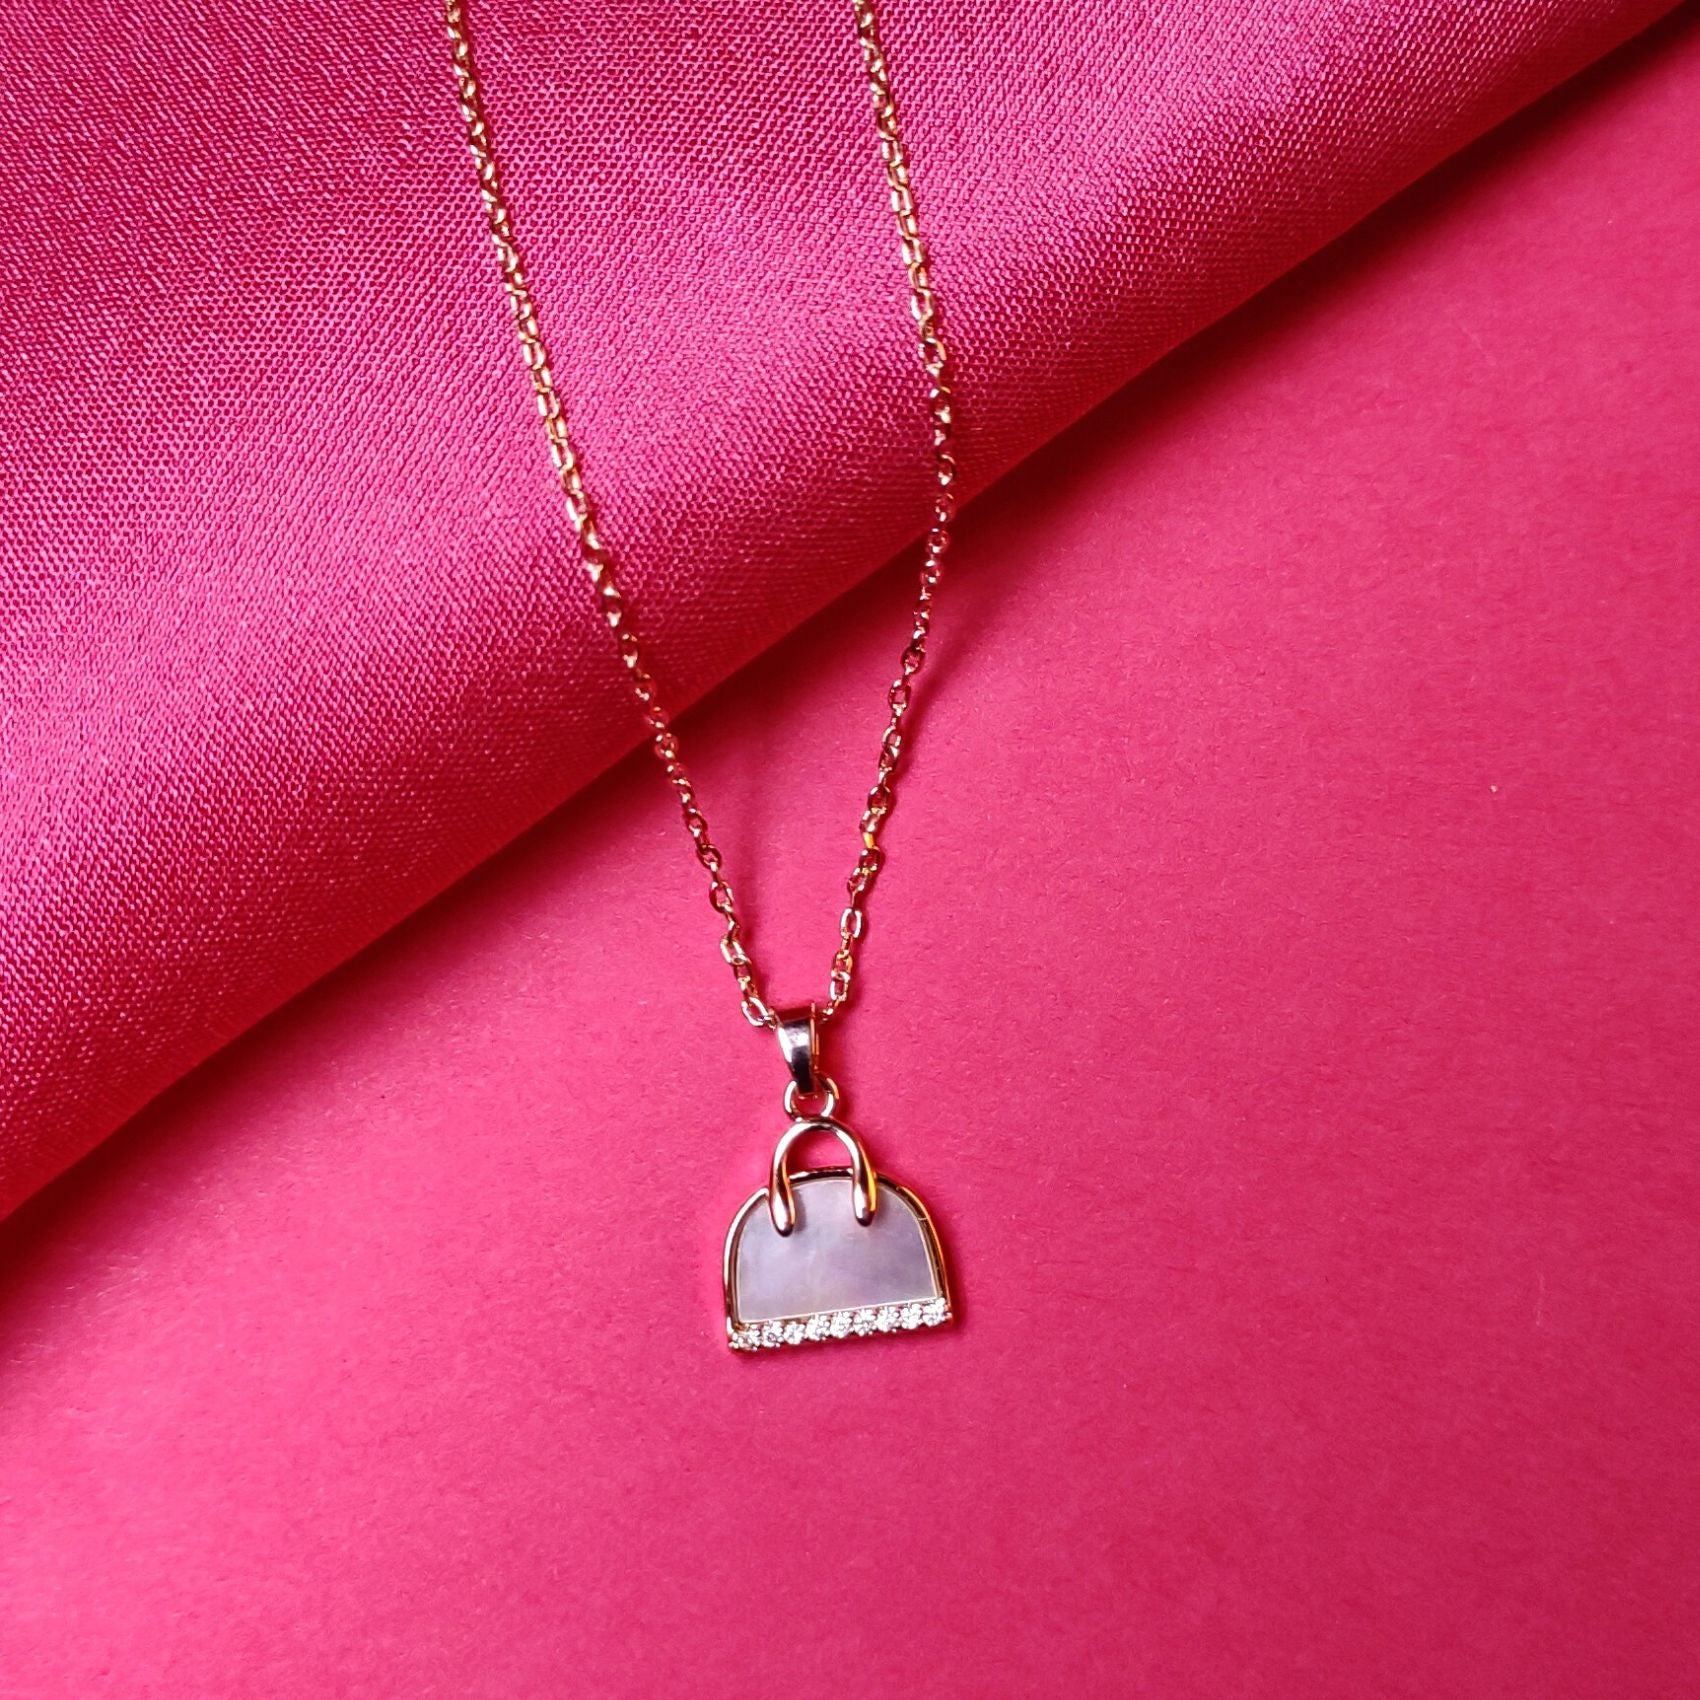 Marc Jacobs The Marc Jacobs The Tote Bag Necklace | Harrods UK